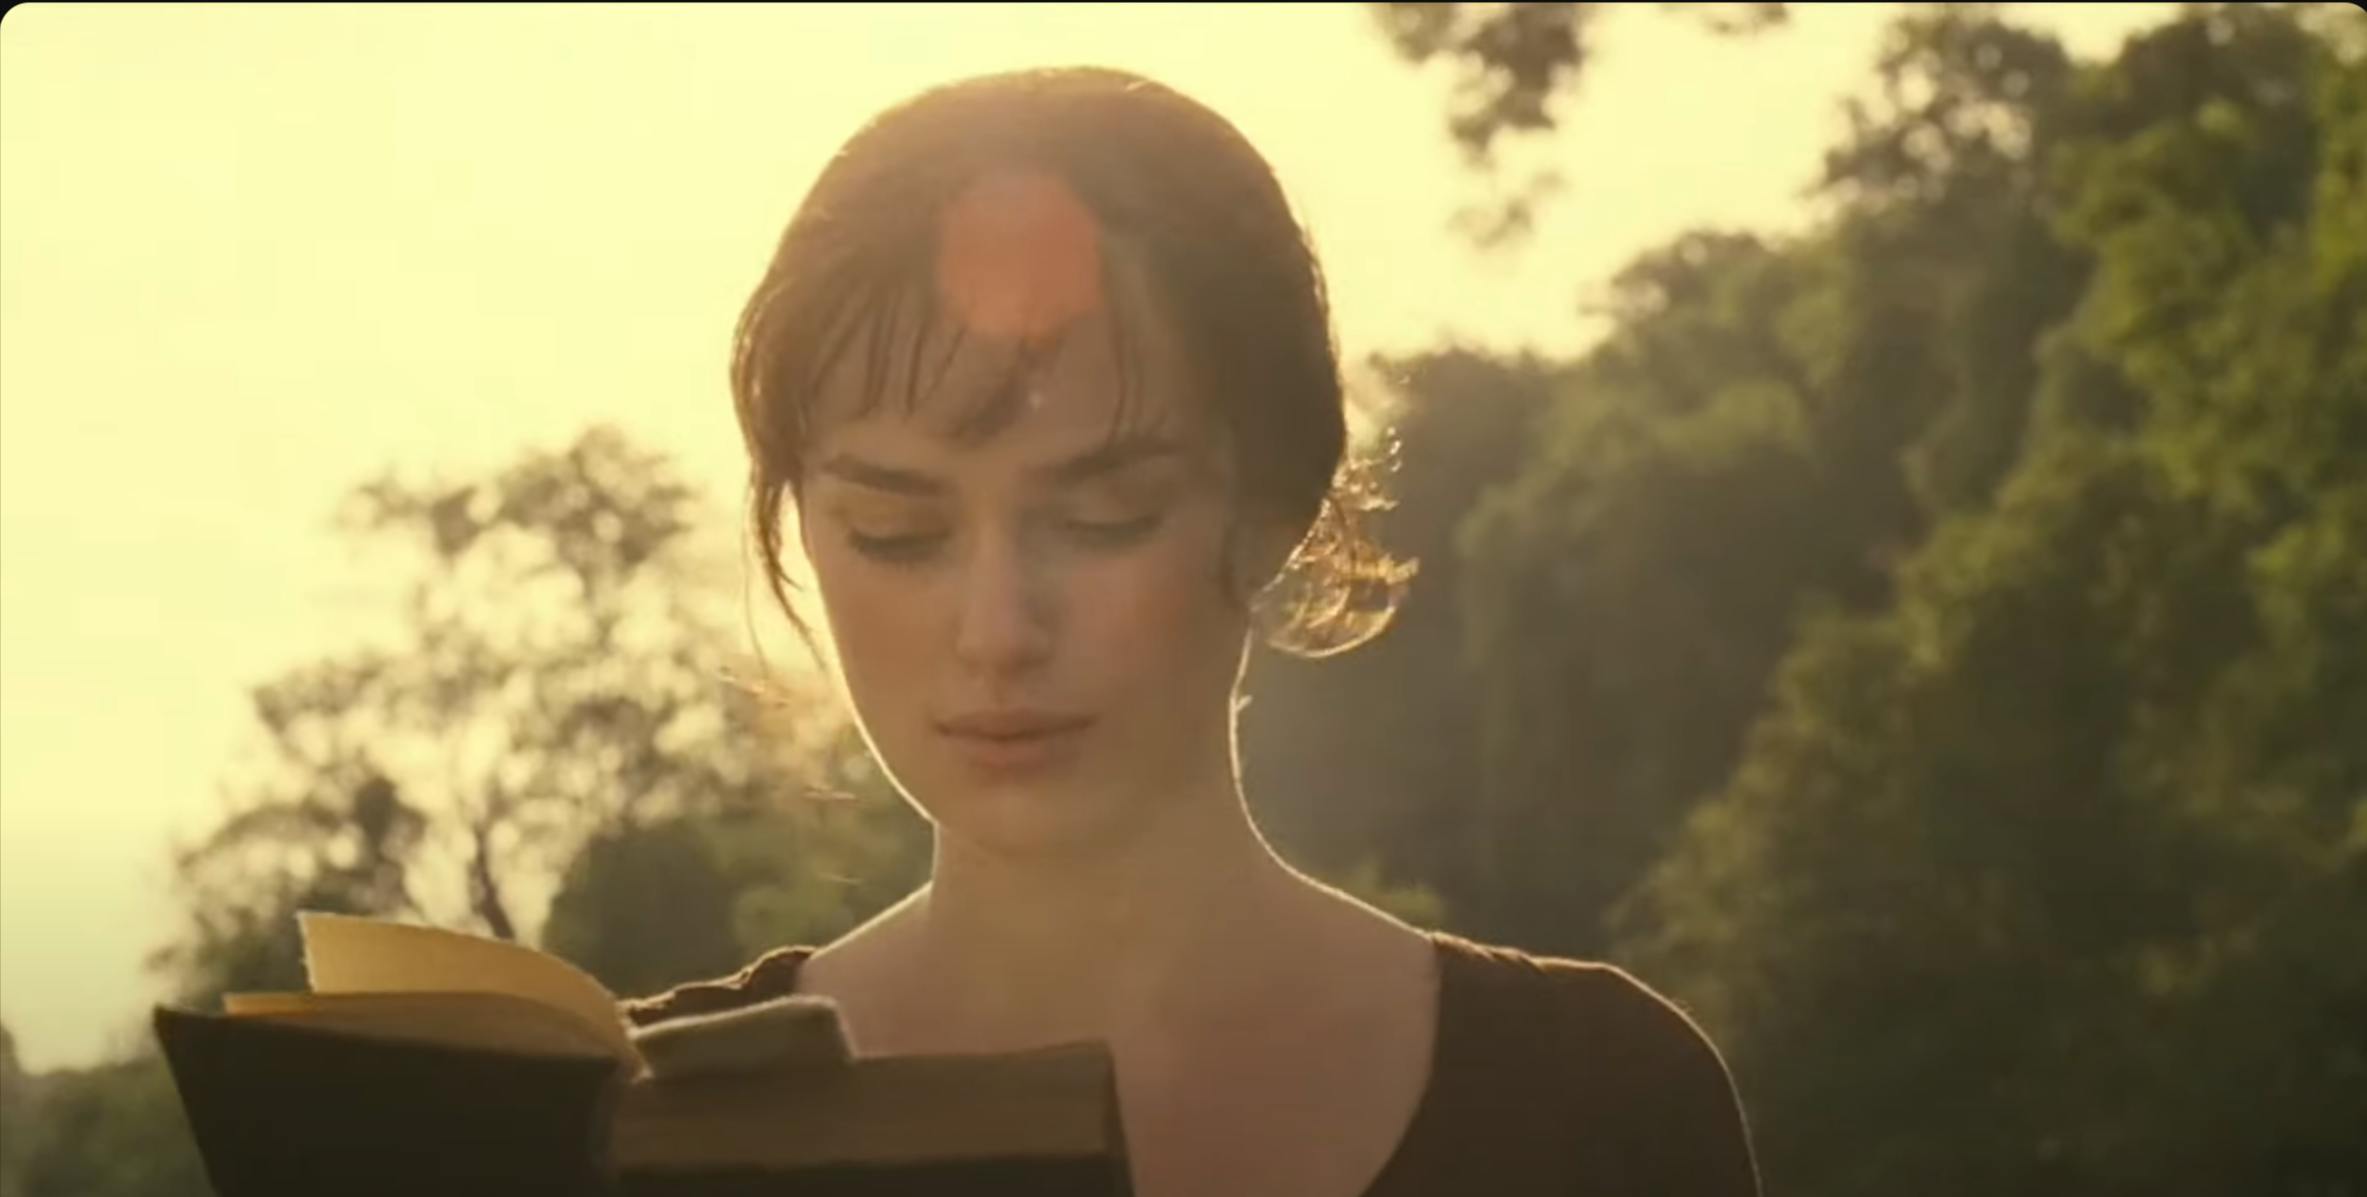 The opening image of Pride & Prejudice shows Kiera Knightly as Elizabeth Bennet, reading a book in the countryside at sunrise. With very little information, we know this character is up early and reading. We eventually learn her Elizebeth is viewed as an intelligent woman who wishes to marry for love rather than money and furthering the socio-economic status of her family. 